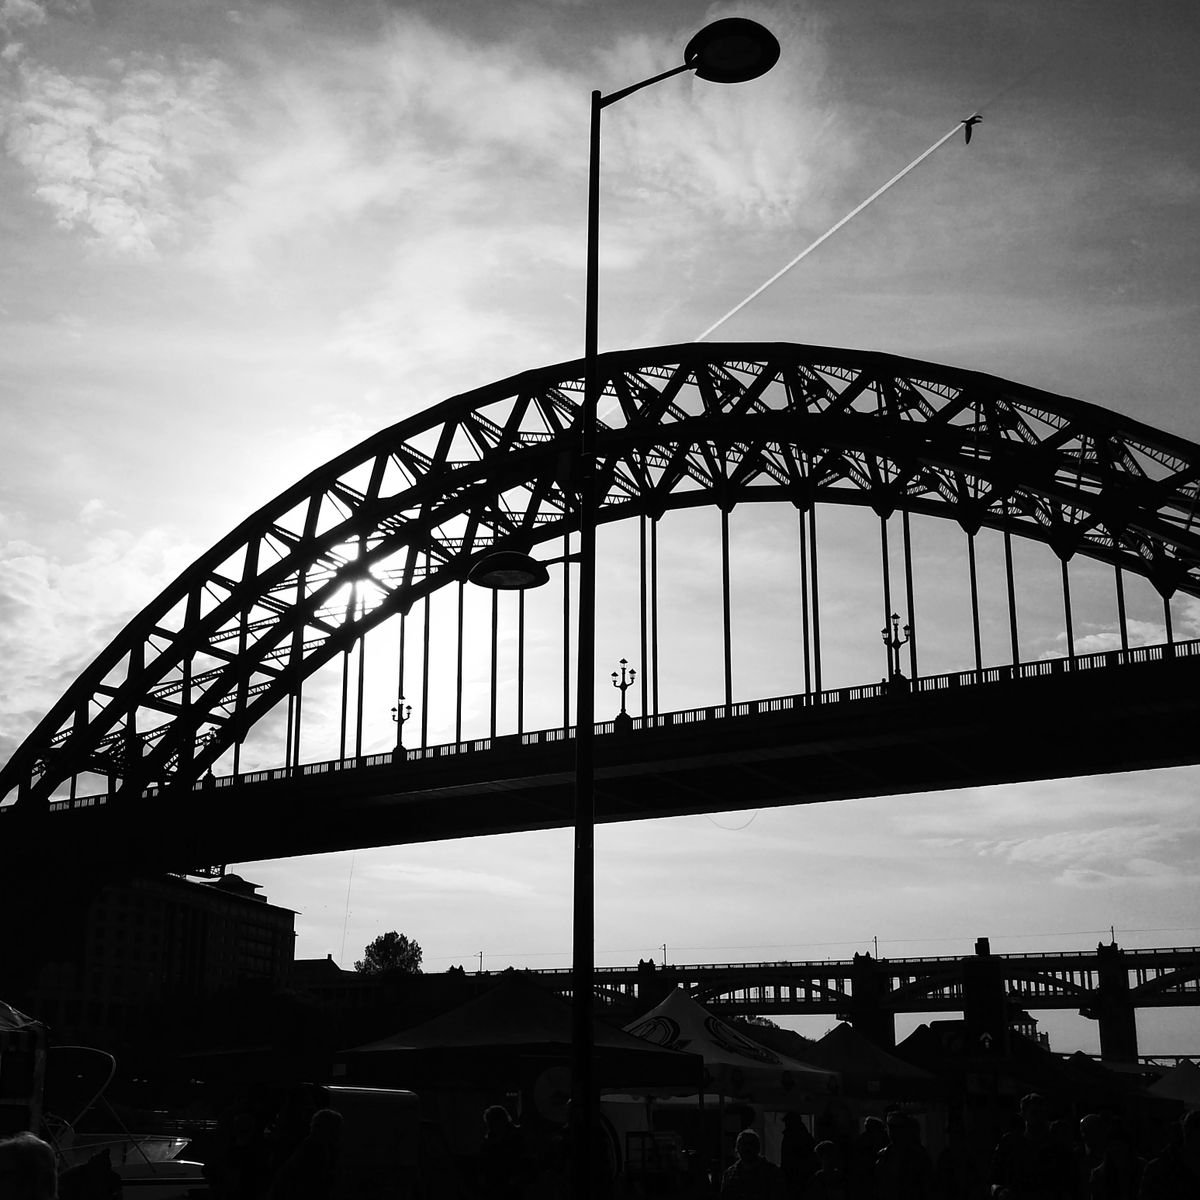 Tyne, 12x12 Inches, C-Type, Unframed by Amadeus Long